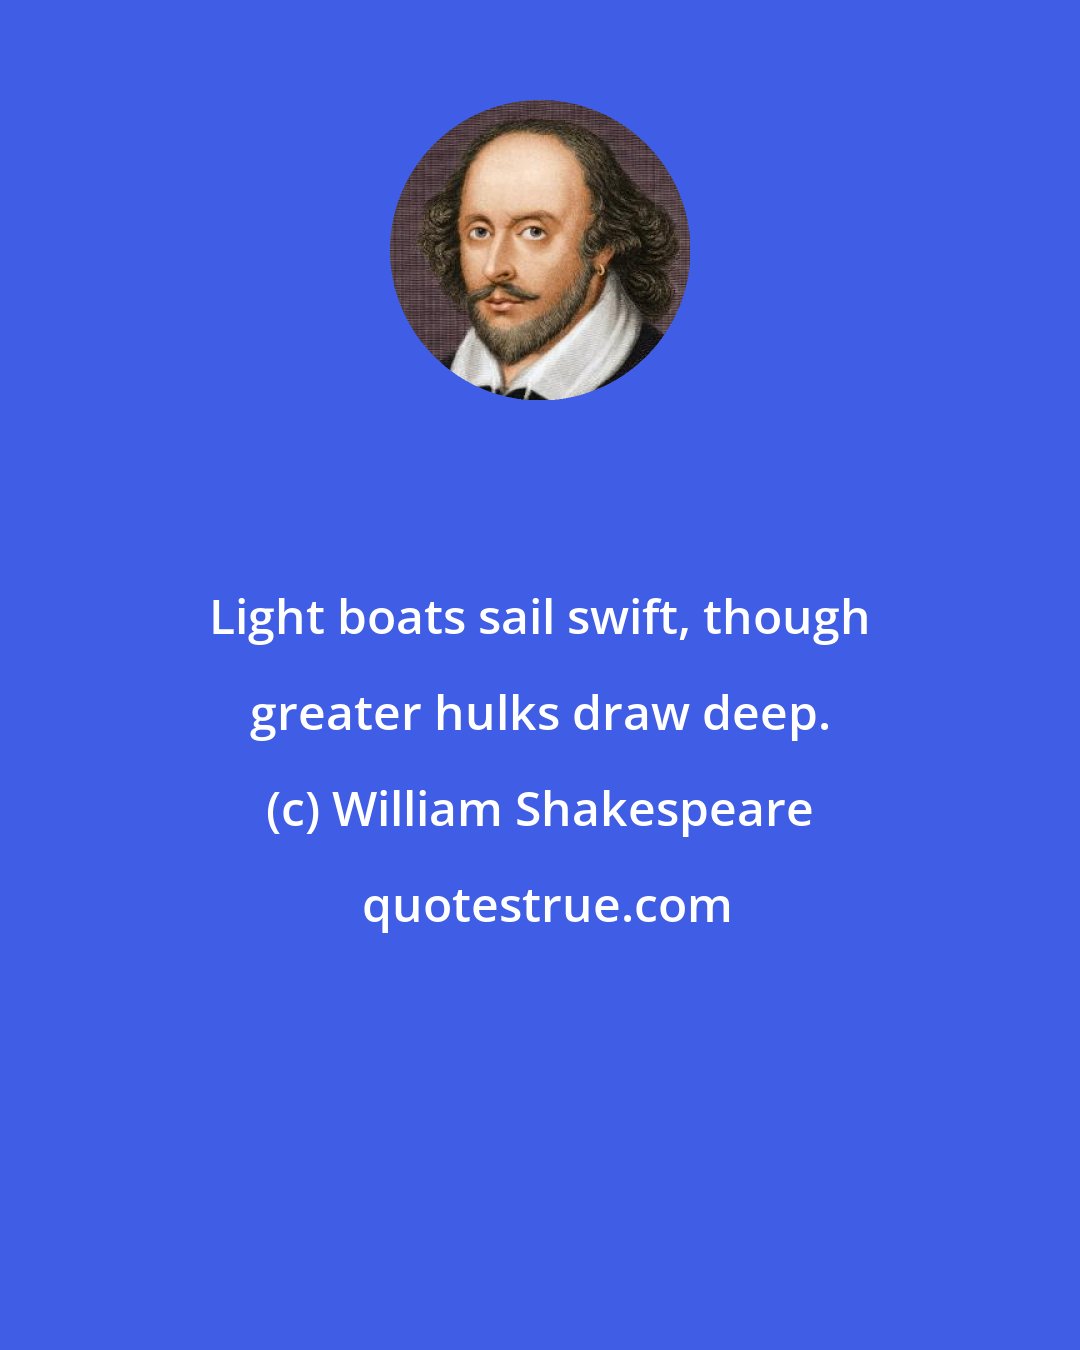 William Shakespeare: Light boats sail swift, though greater hulks draw deep.